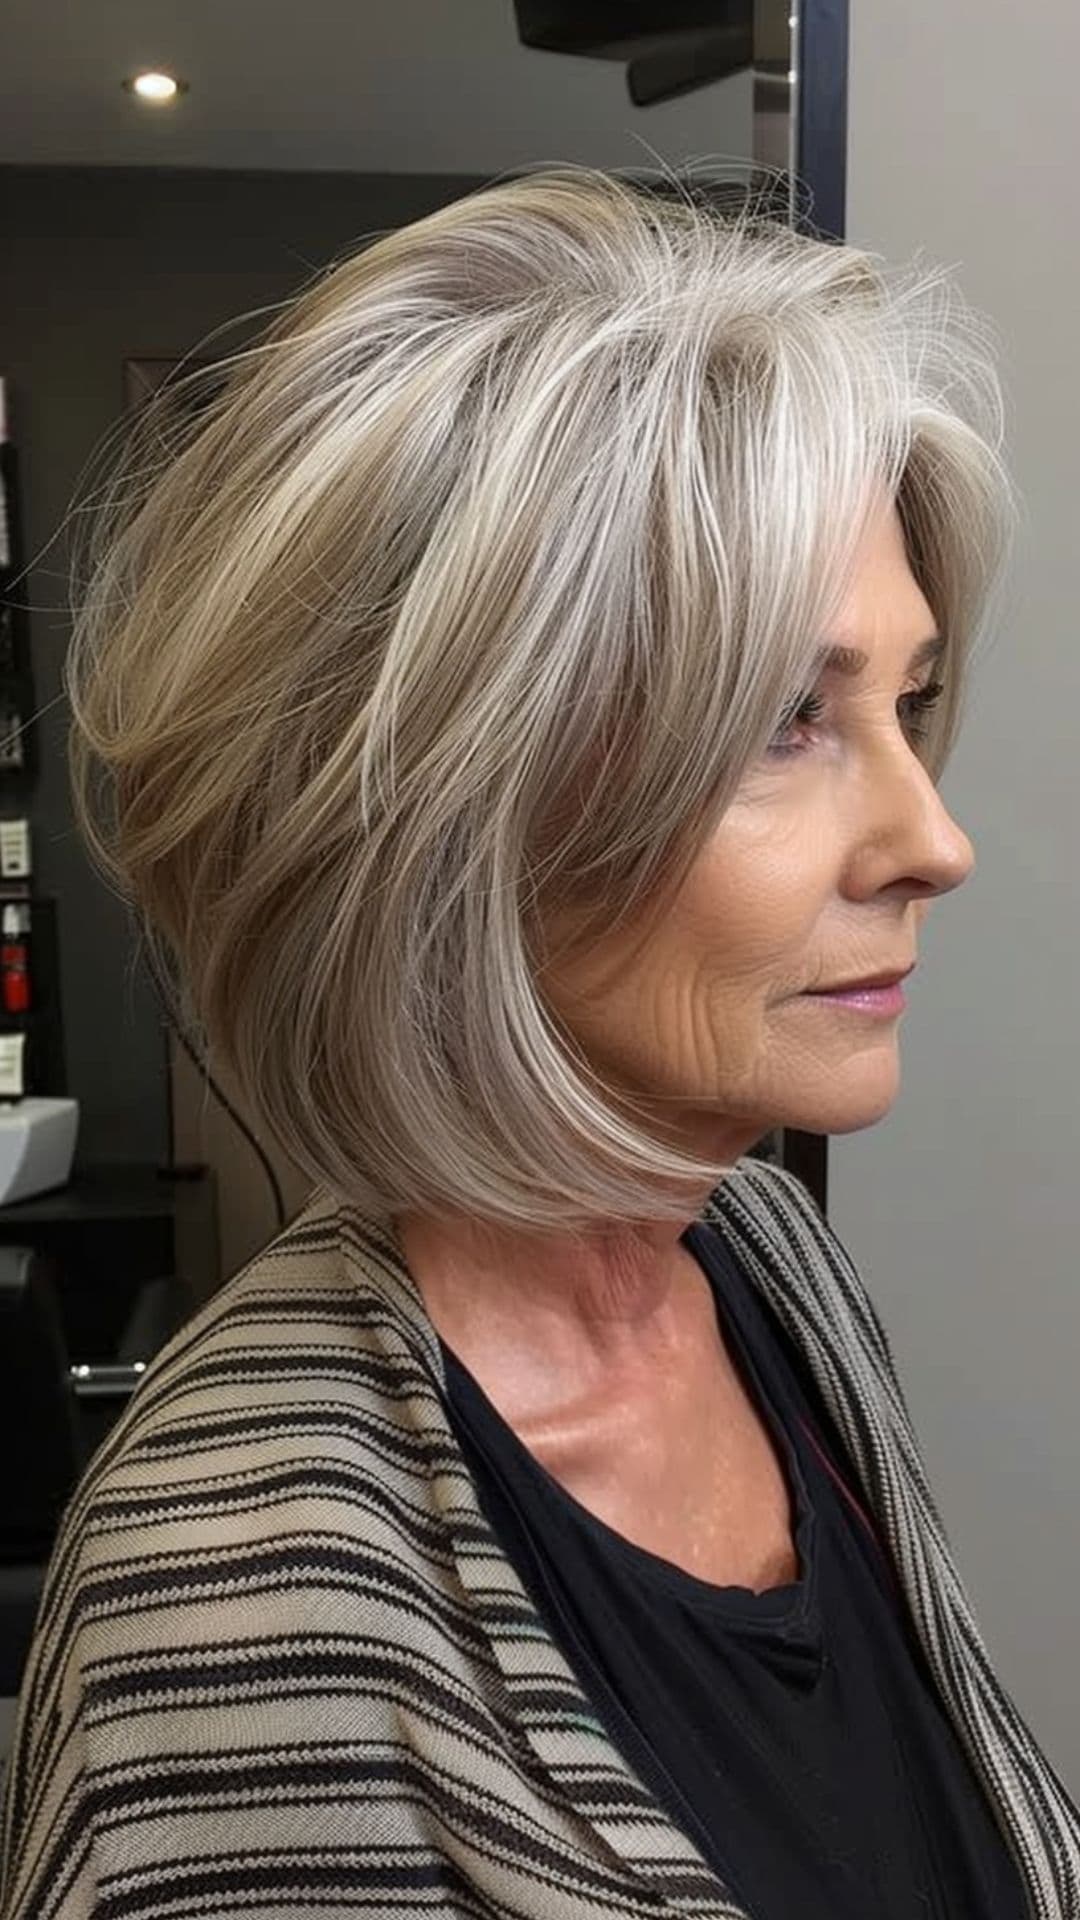 An old woman modelling a short ash blonde hair.